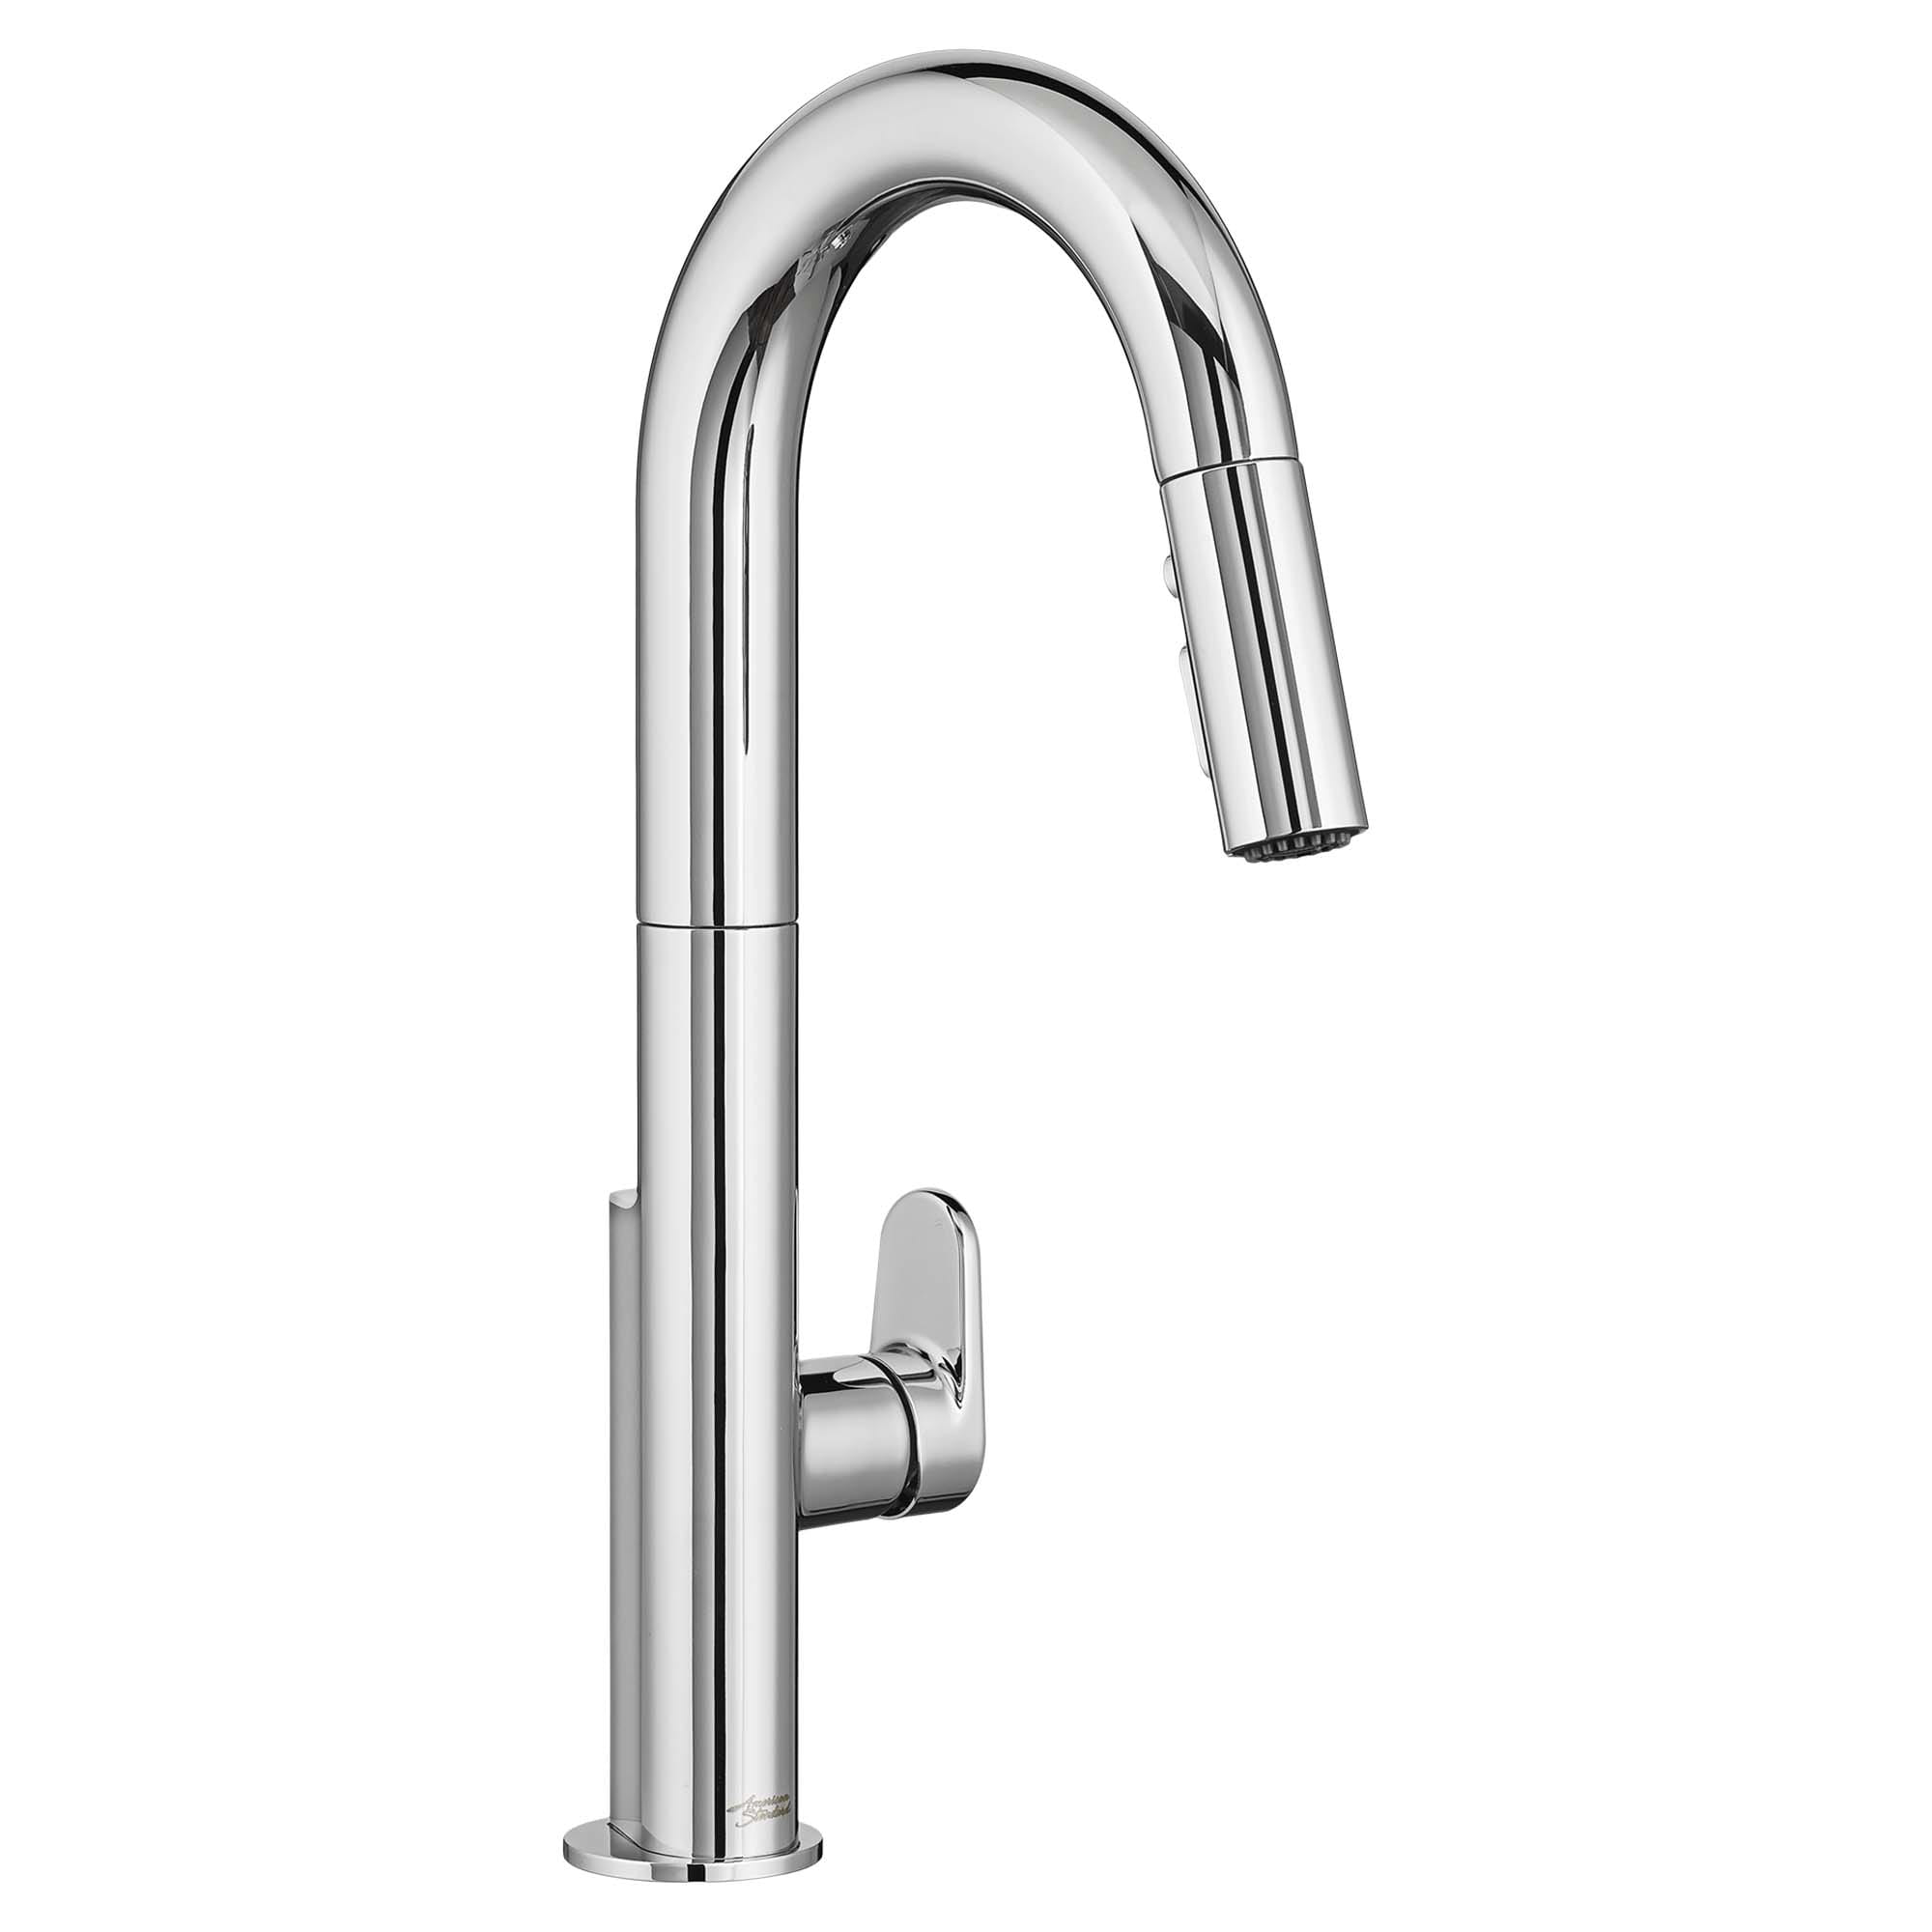 Beale Single Handle Pull Down Dual Spray Kitchen Faucet 15 gpm 57 L min CHROME